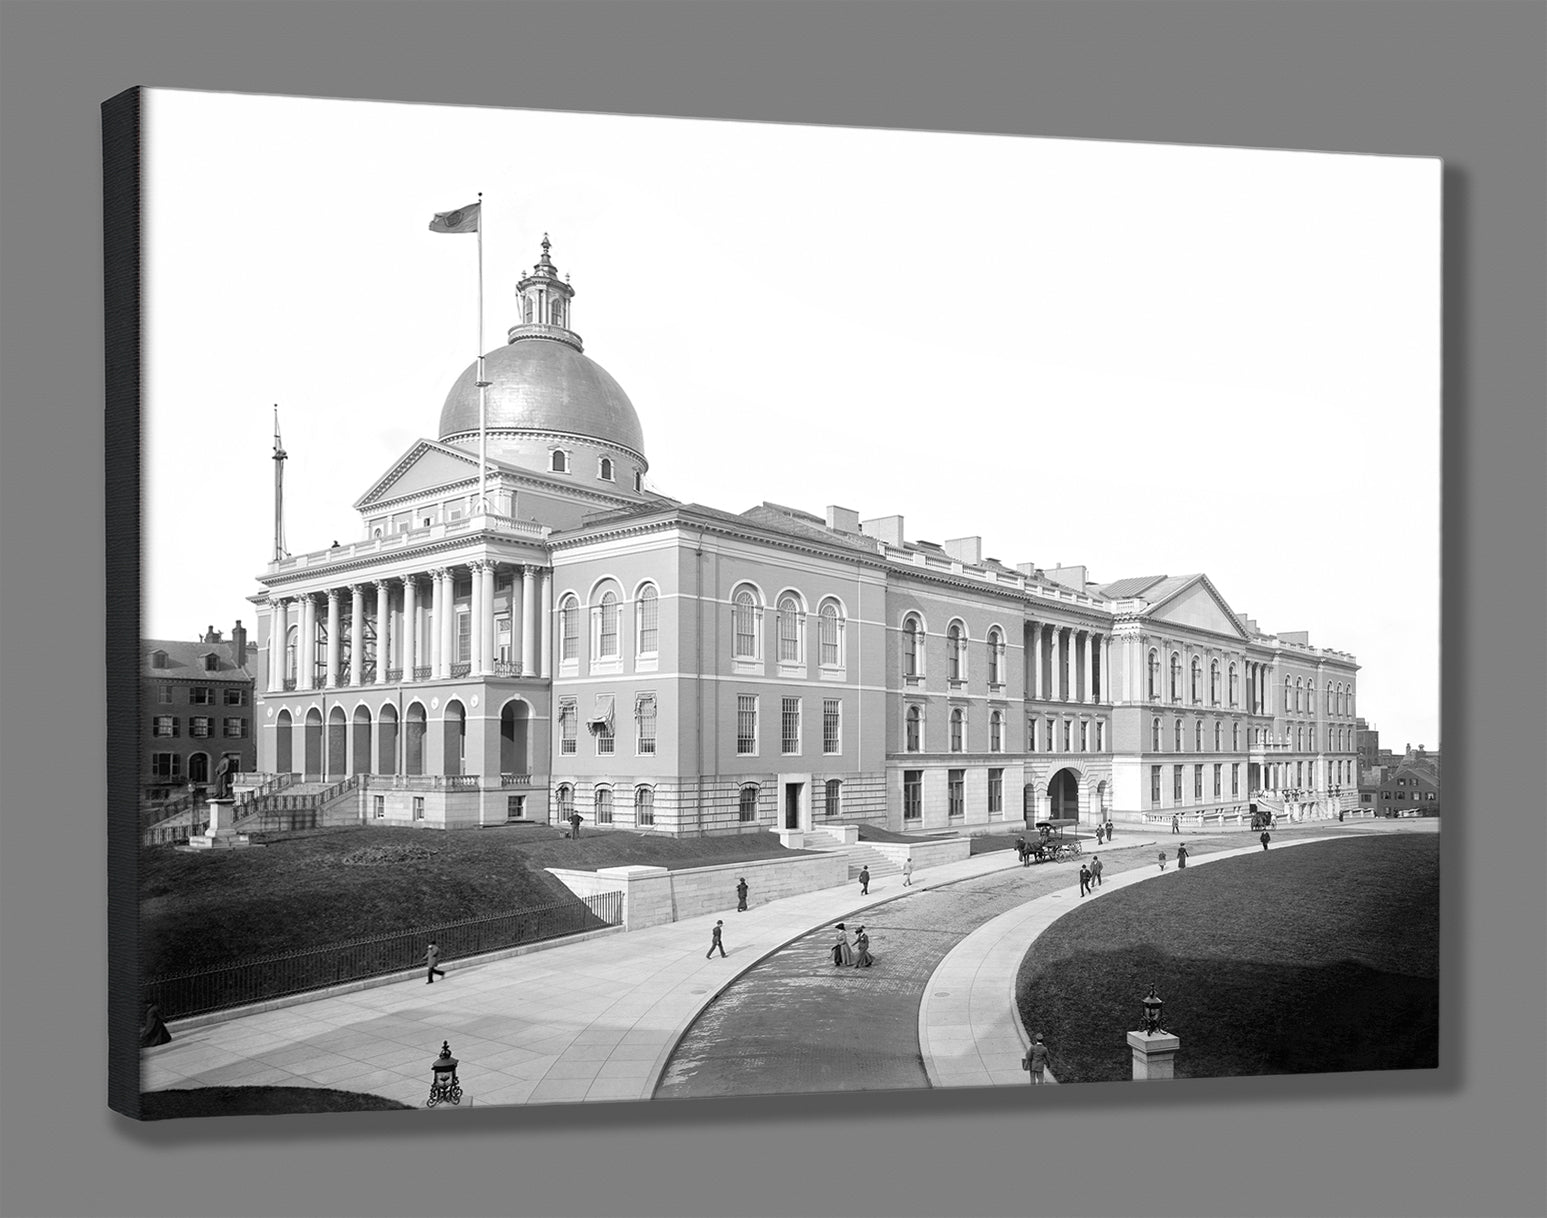 A mockup of a stretched canvas print of a vintage image of Boston's State House